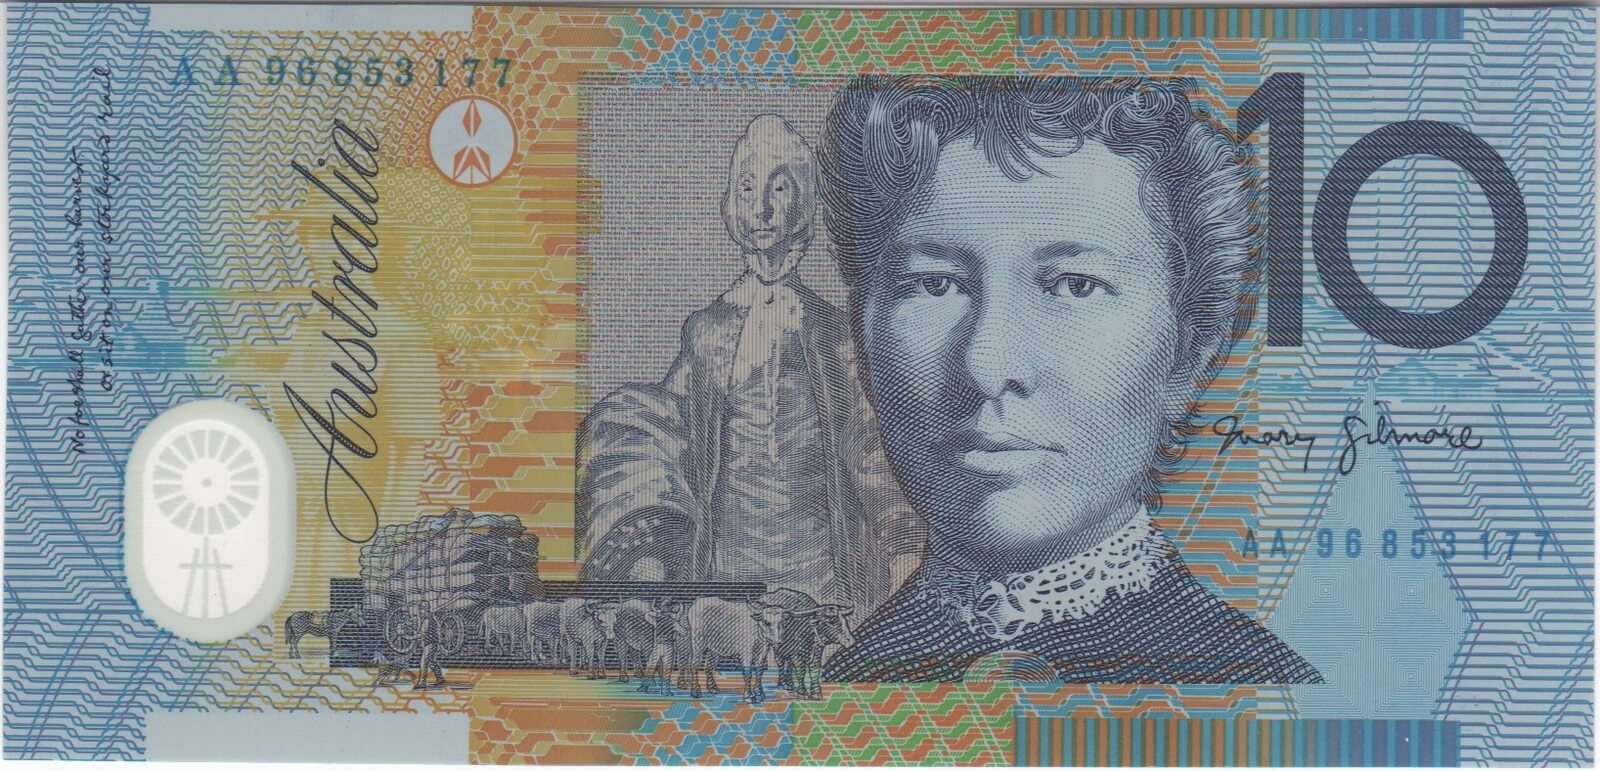 1996 $10 Note AA96 First Prefix Macfarlane/Evans R318aF Uncirculated product image